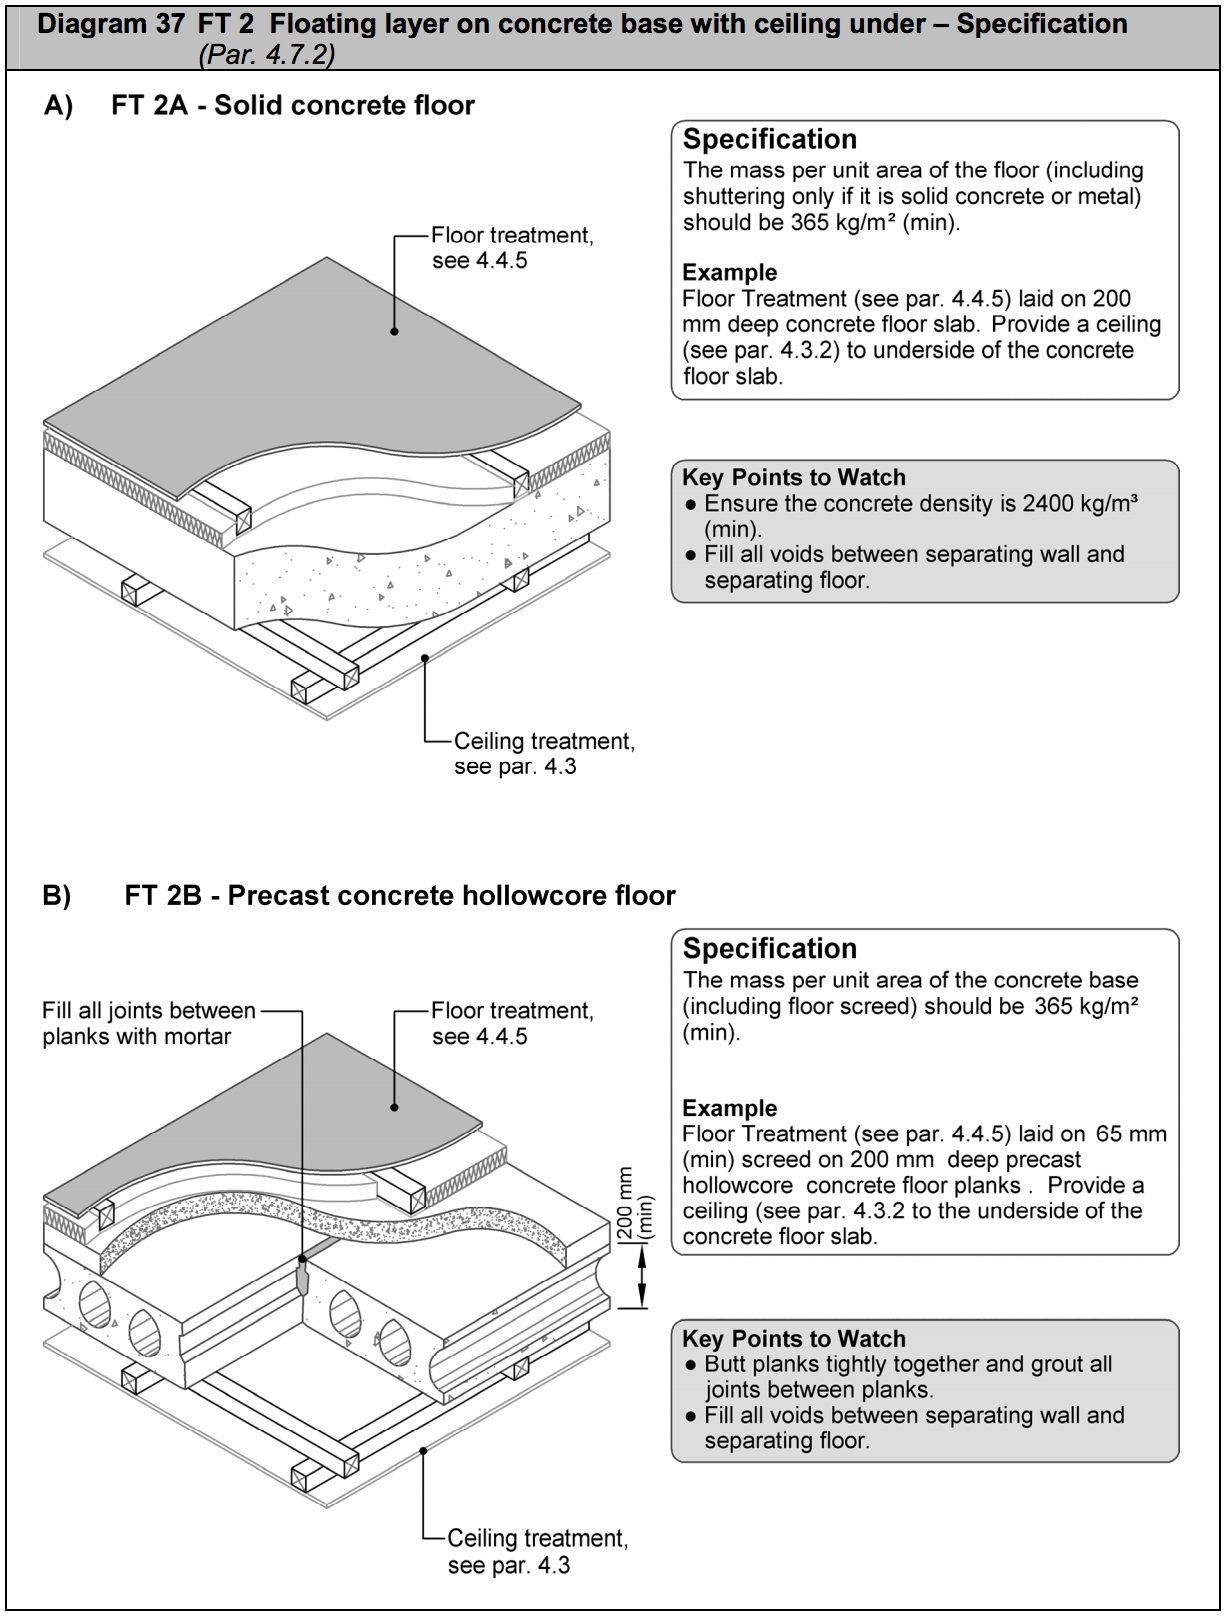 Diagram HE37 - FT 2 Floating layer on concrete base with ceiling under - specification - Extract from TGD E